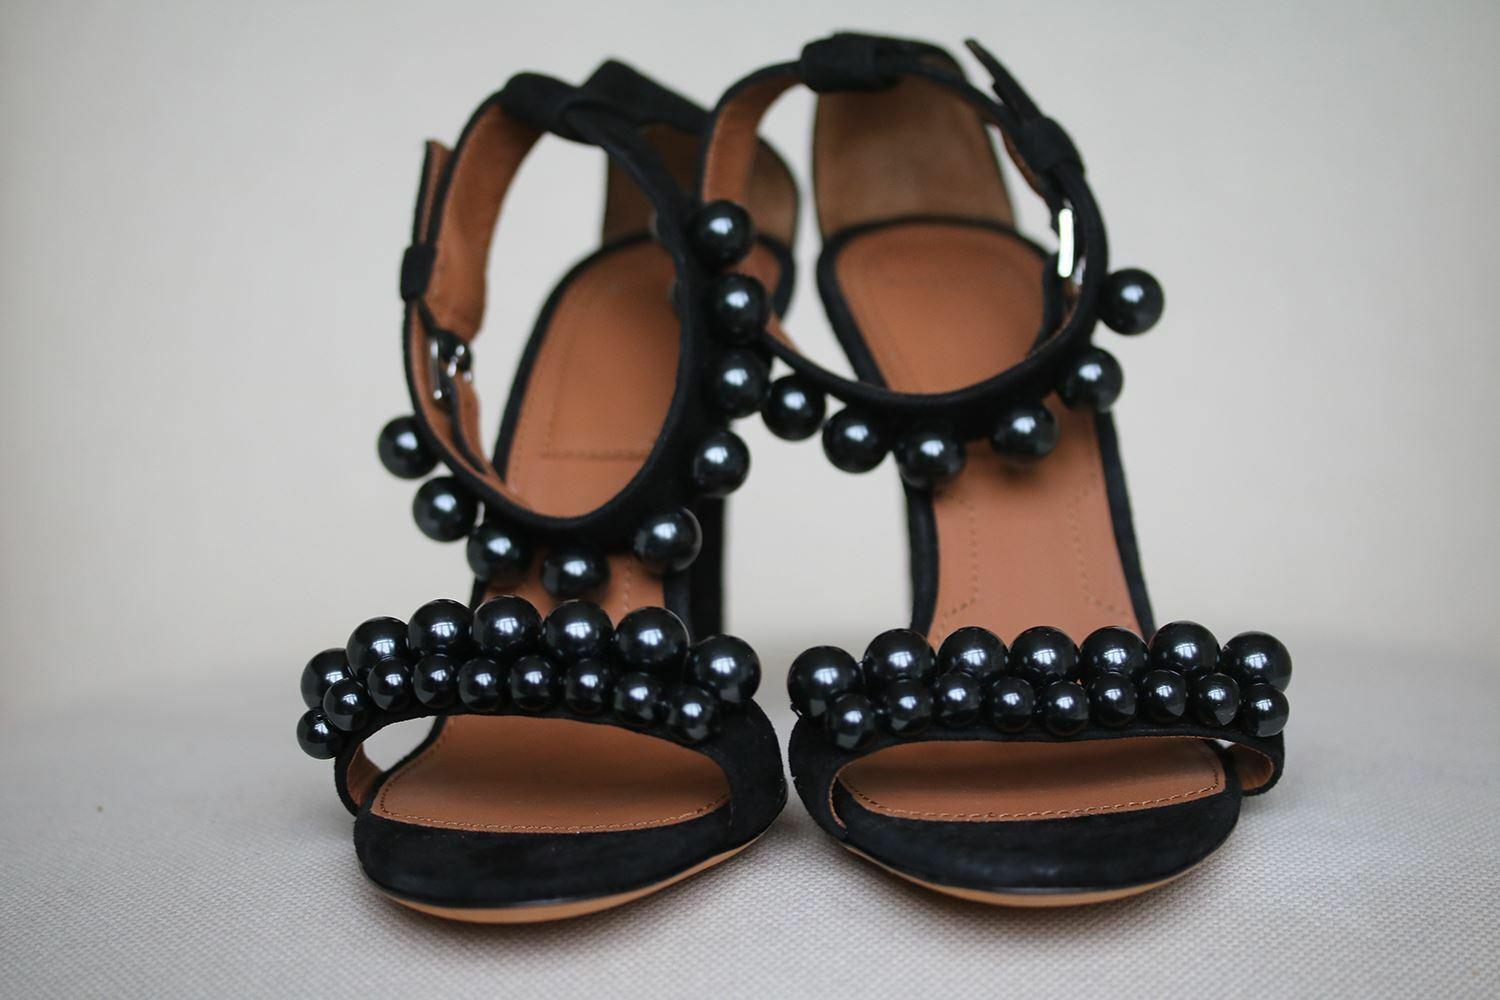 Aptly named 'Classic Line', Givenchy's sandals have a minimalist silhouette and slim stiletto heel.
They're made from supple black suede and adorned with oversized polished beads.
Heel measures approximately 100mm/ 4 inches. 
Black suede. 
Black